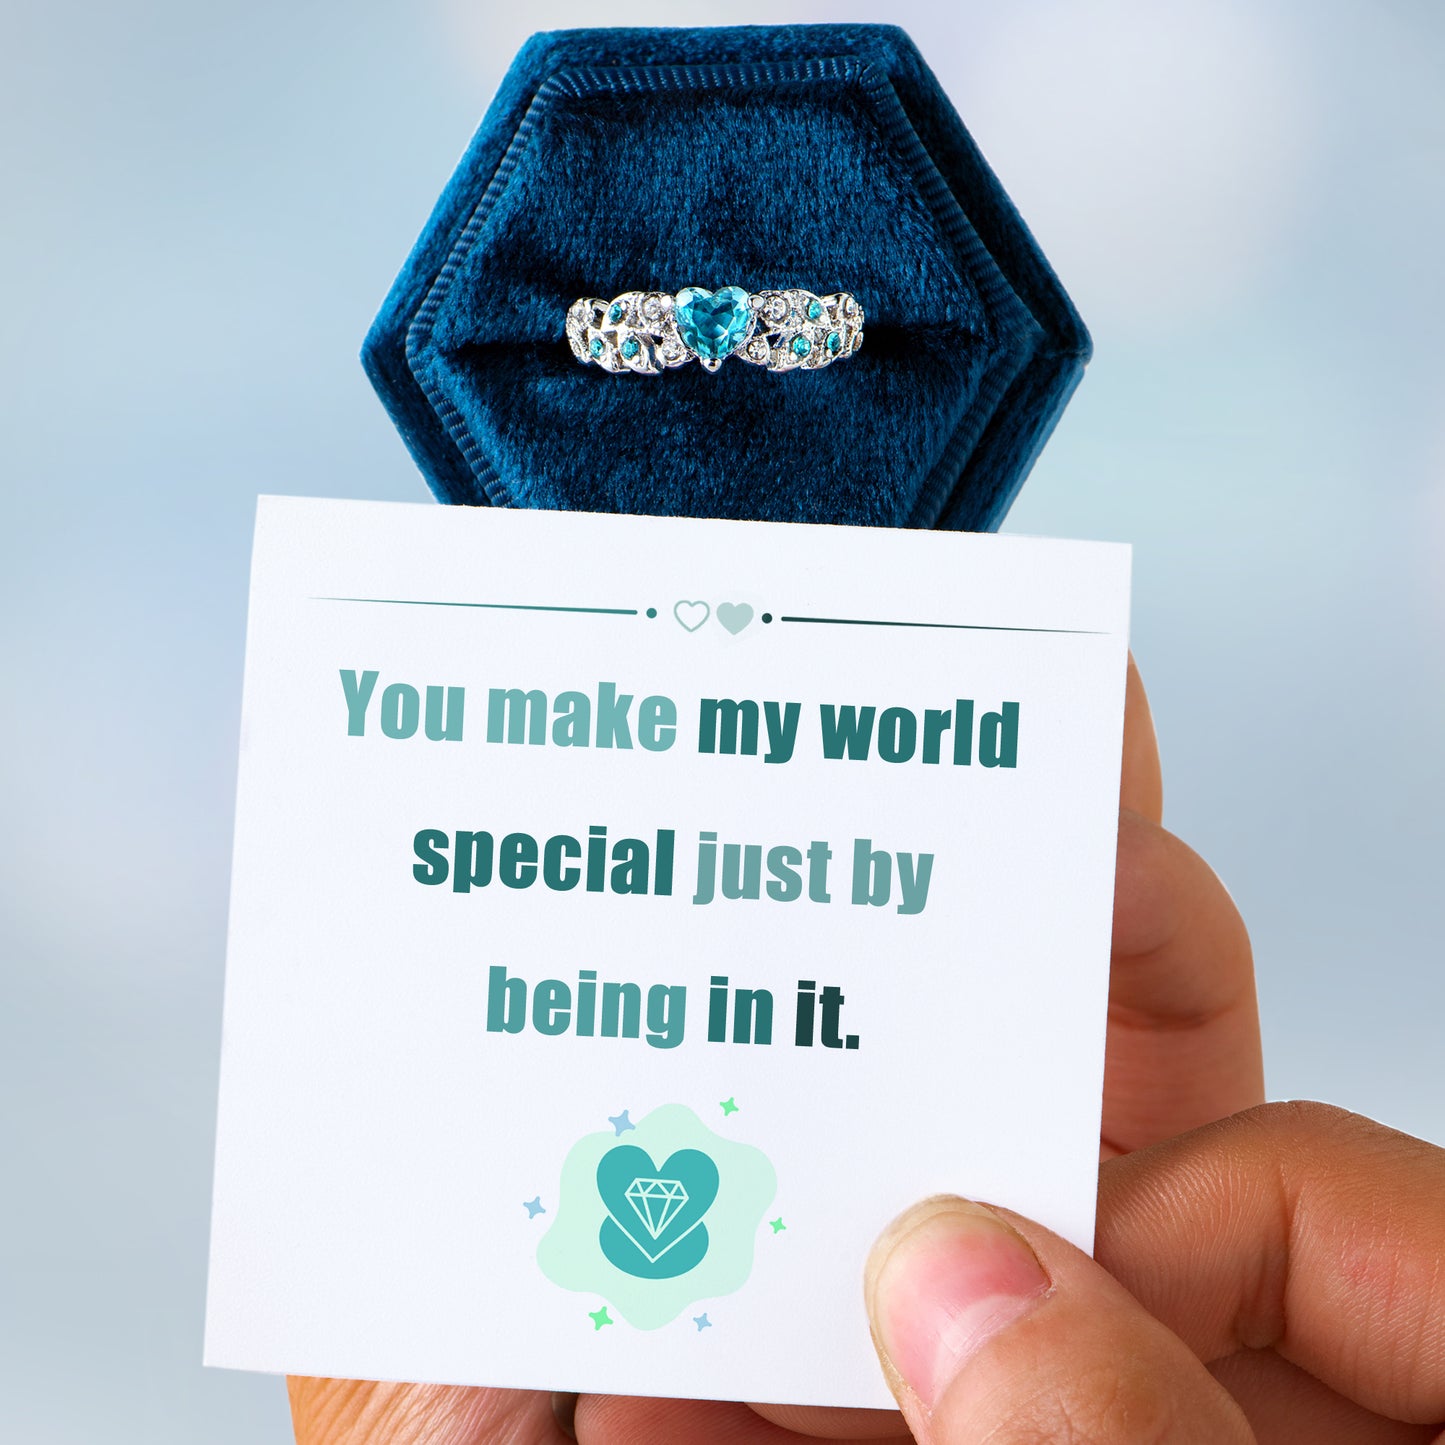 "You make my world special just by being in it" Ring